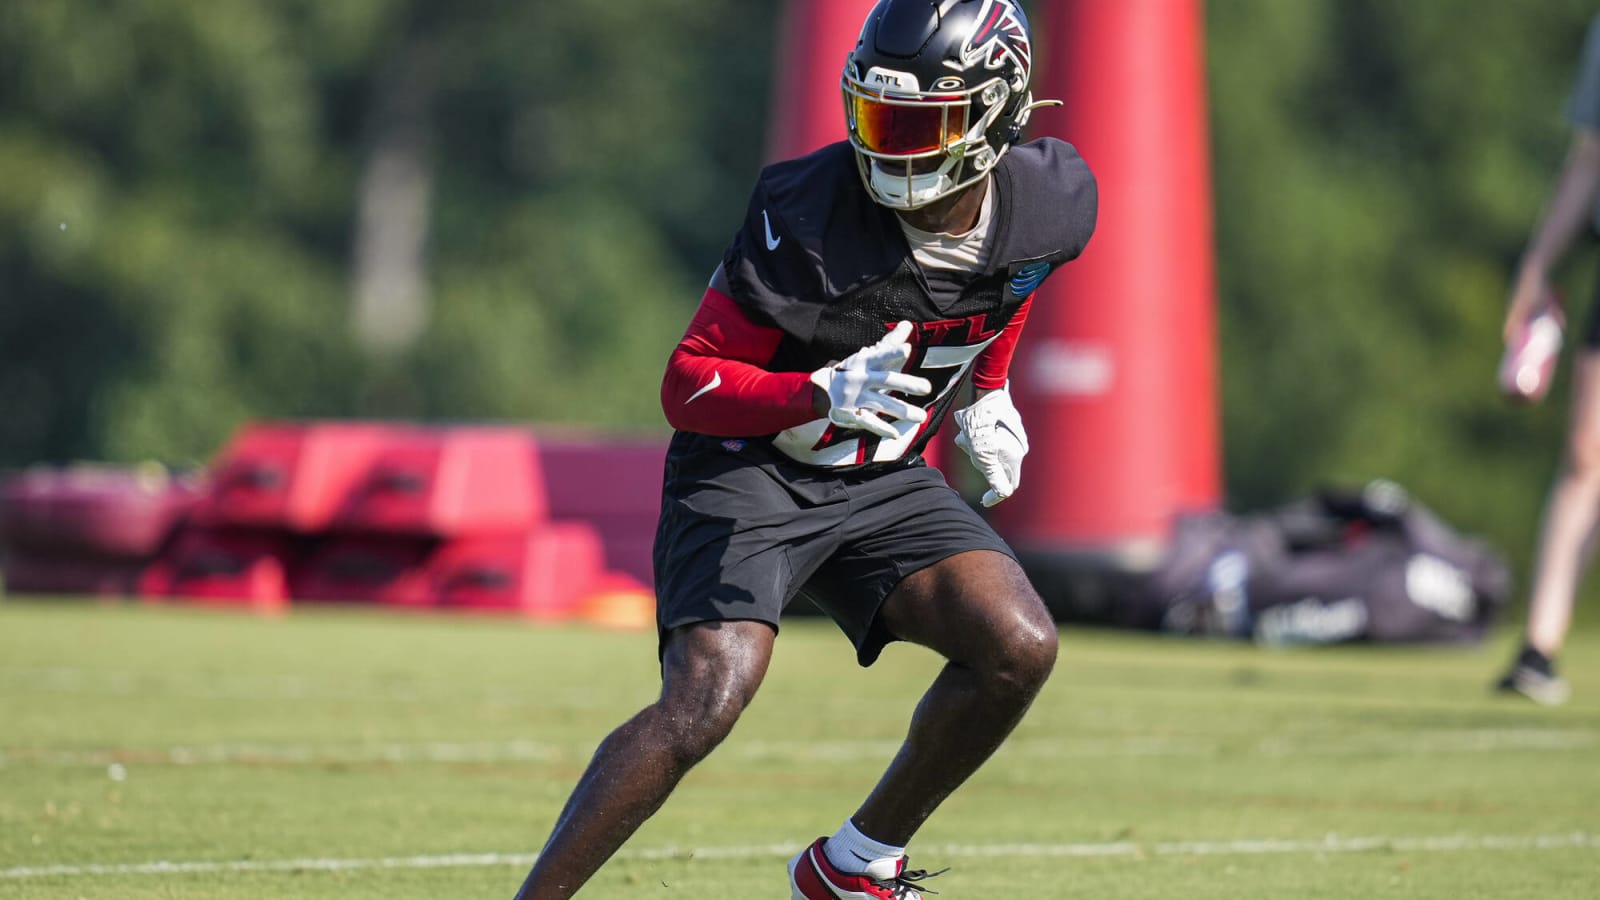 How &#39;Damn Good&#39; Falcons DB Richie Grant Shines Without Spotlight